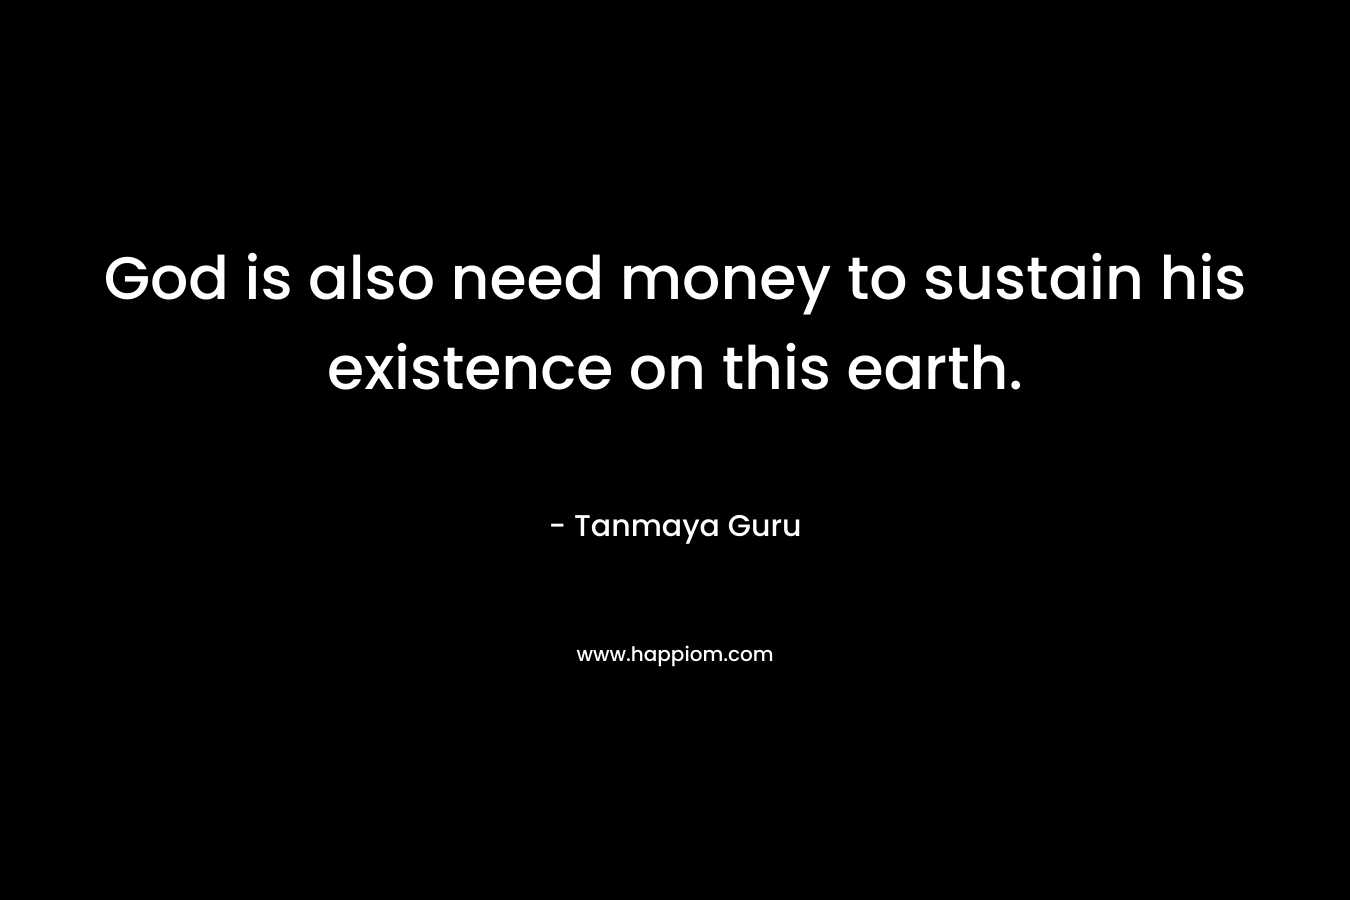 God is also need money to sustain his existence on this earth.